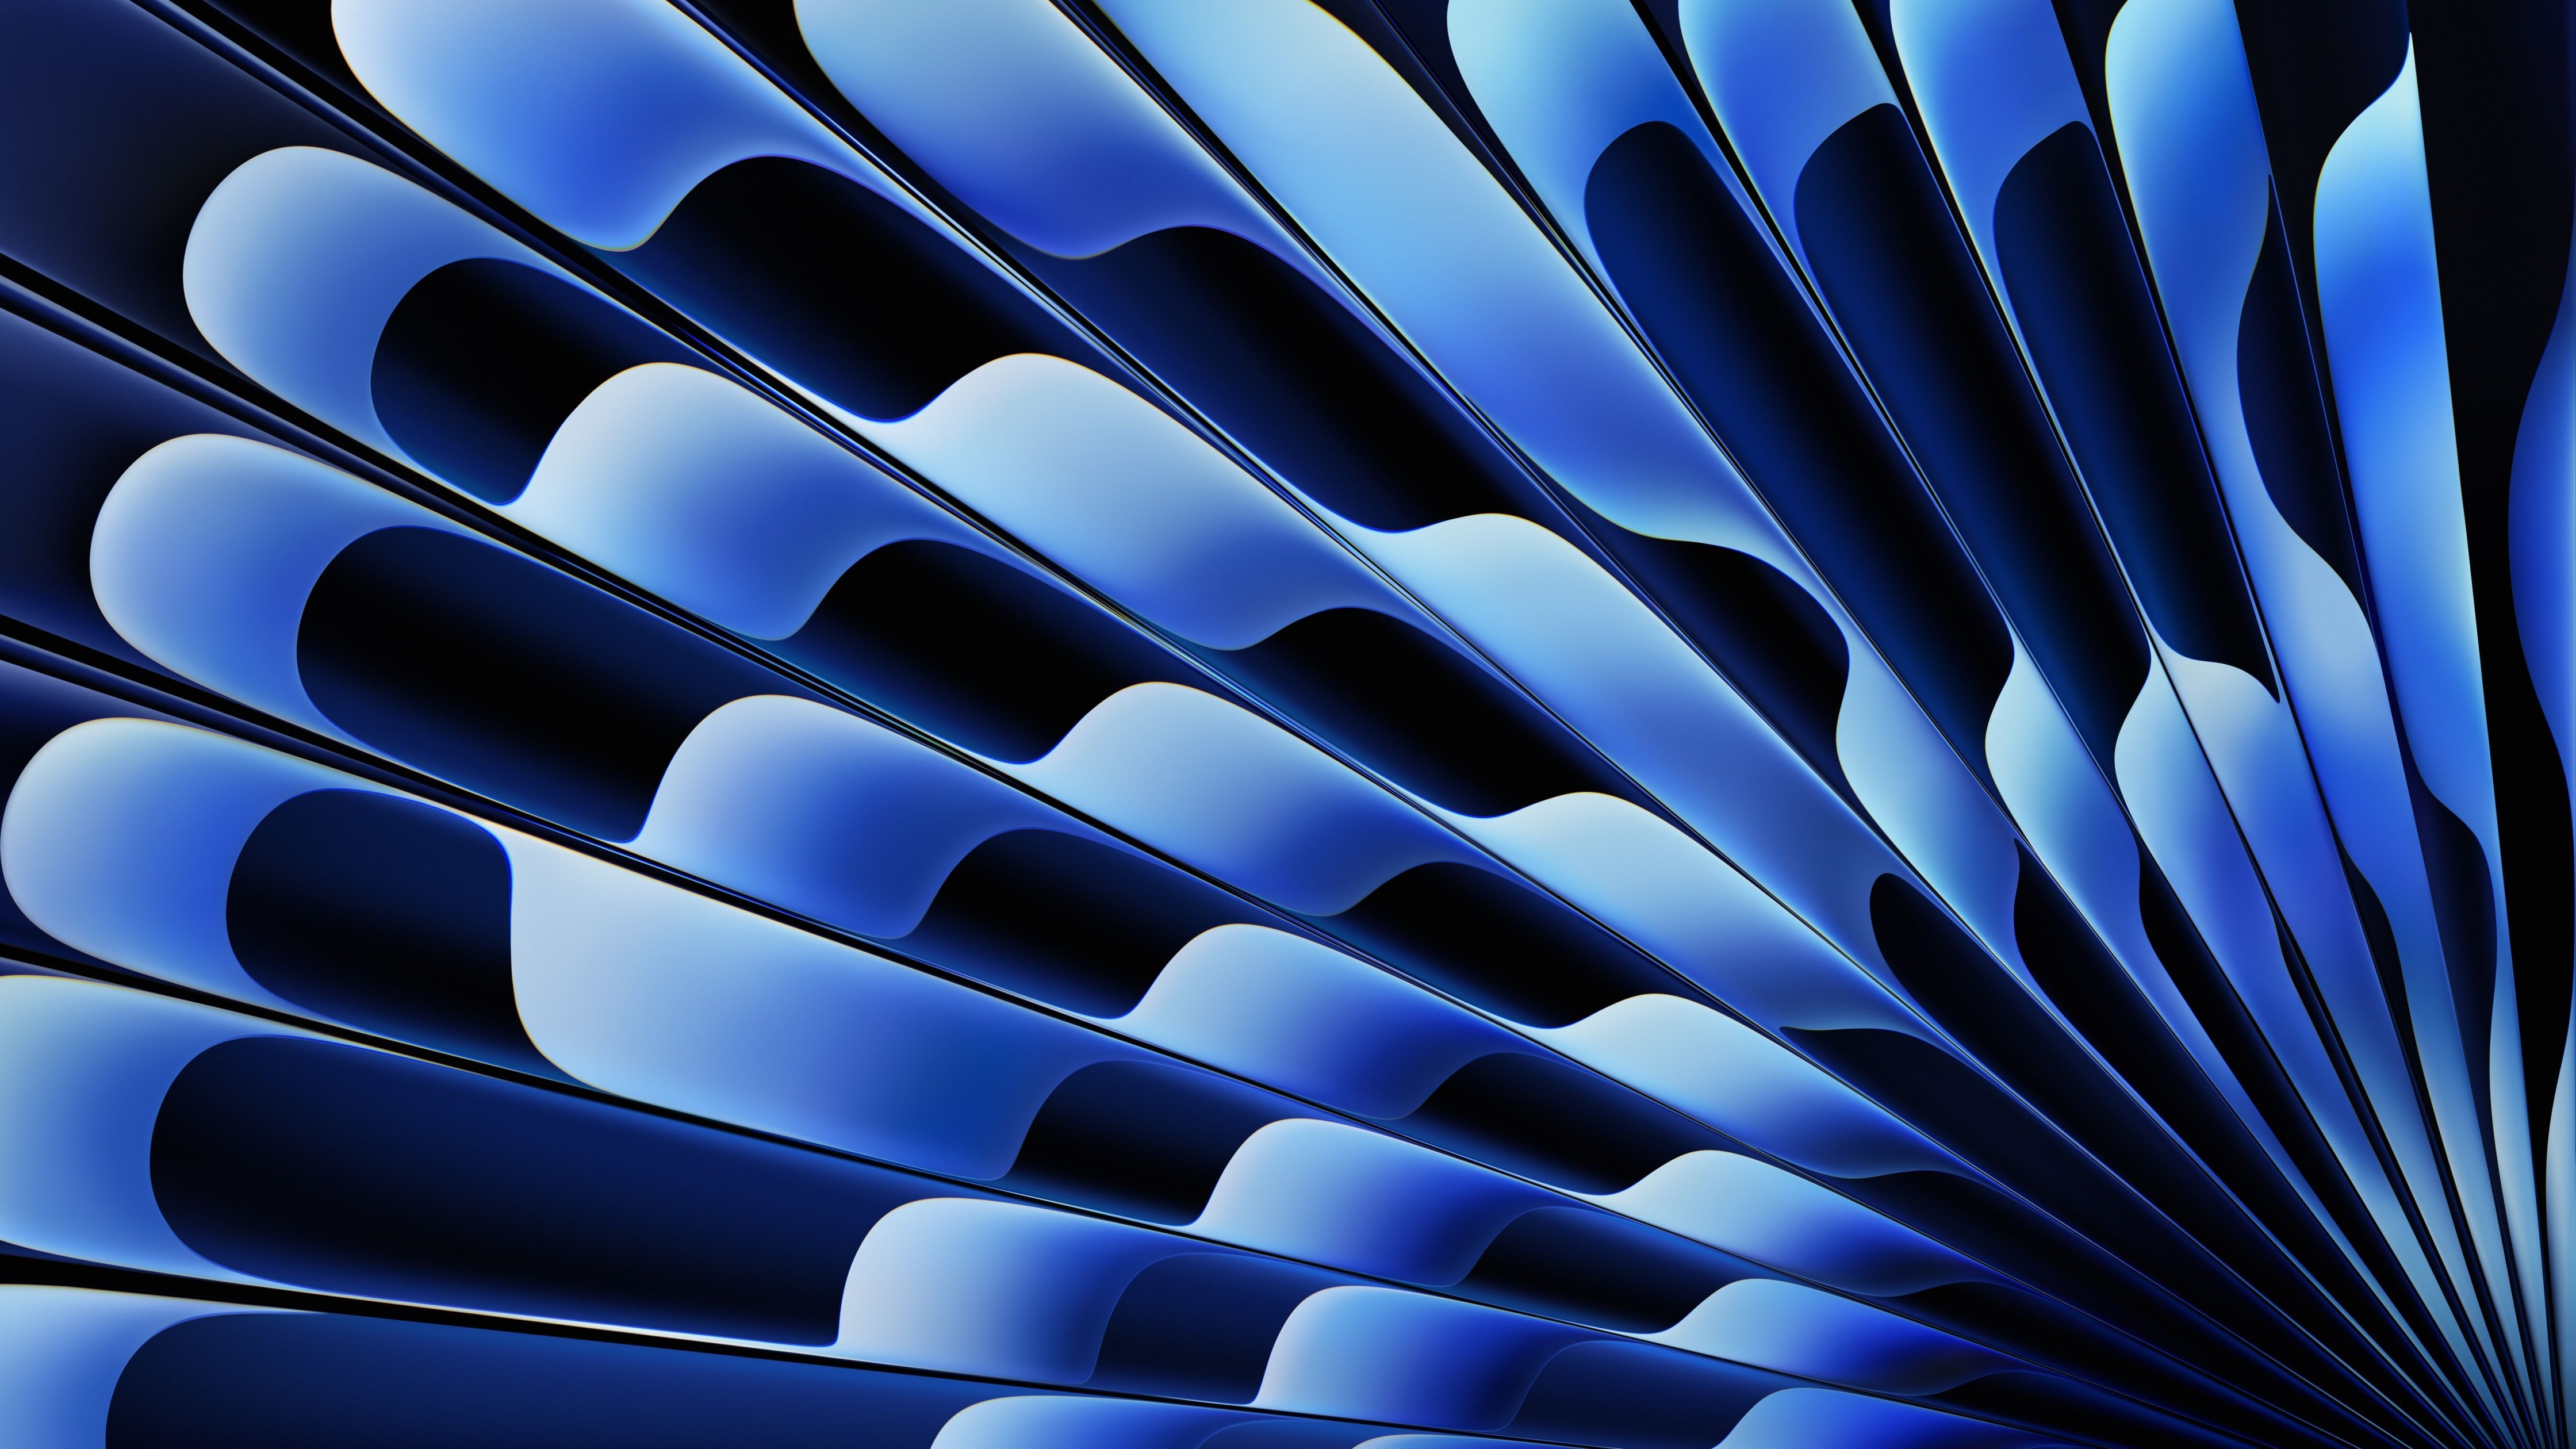 A close up of a blue and black abstract piece of art - IMac, blue